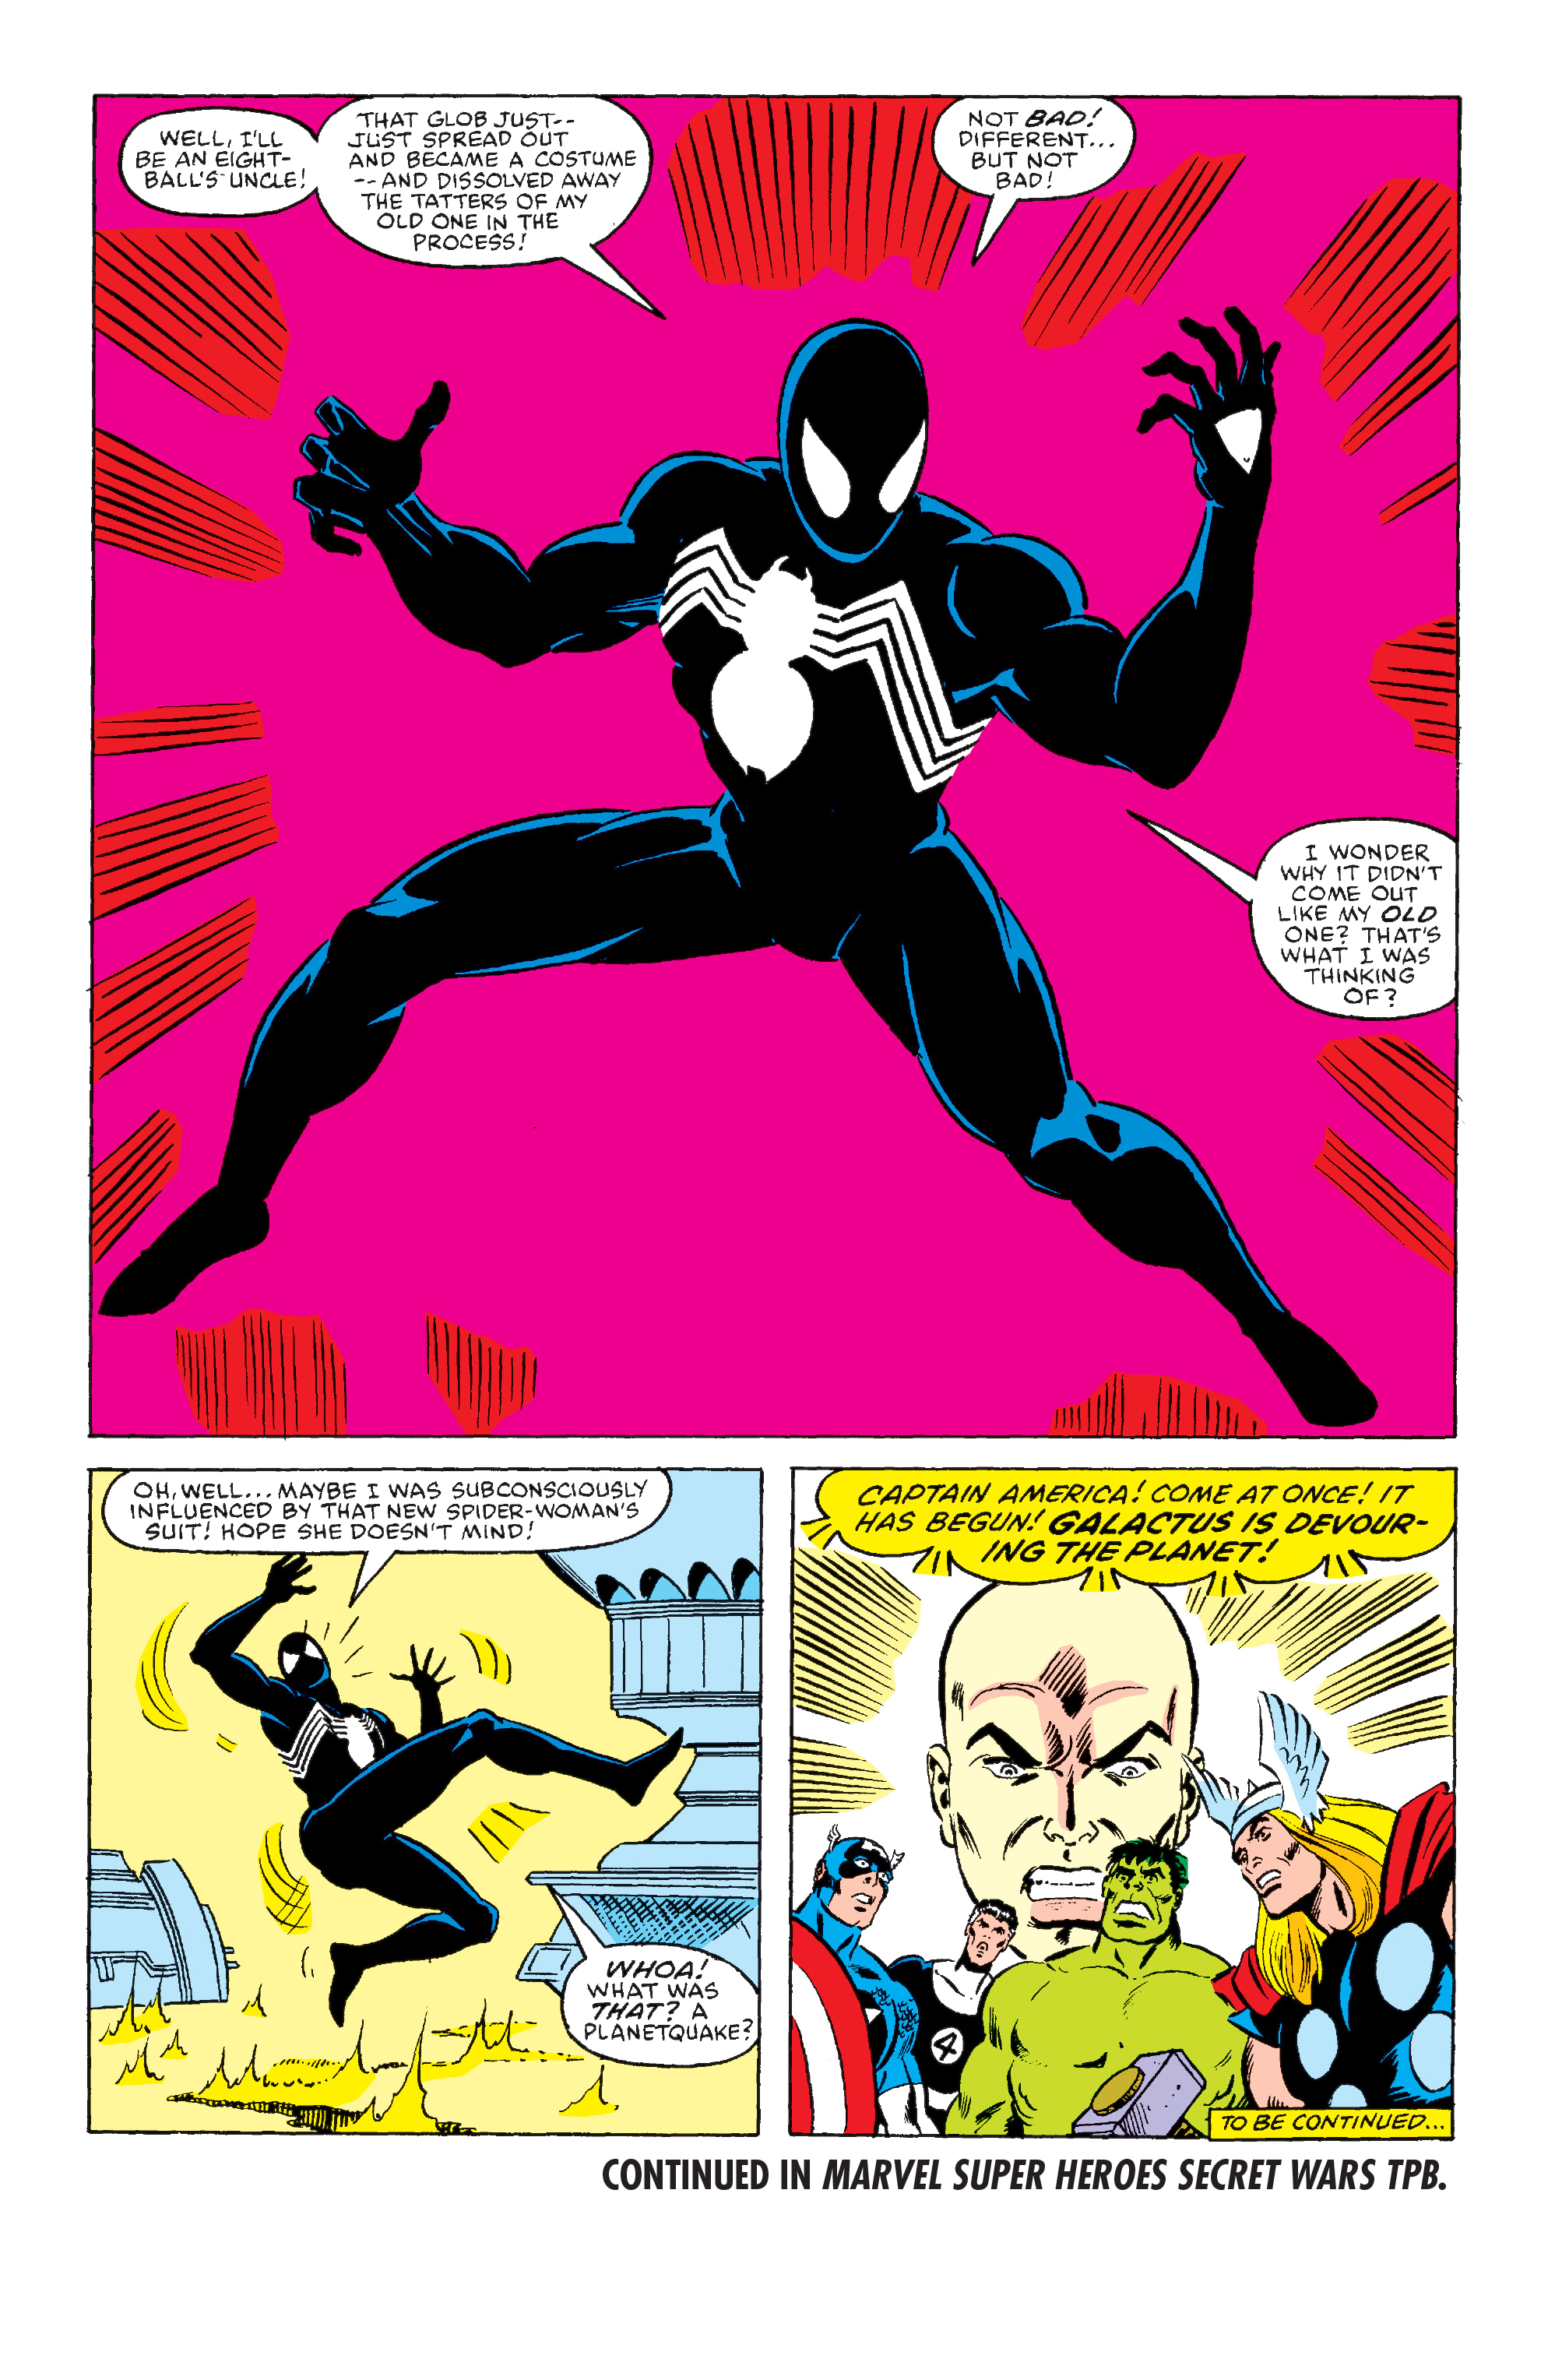 Symbiote Spider Man Marvel Tales 2021 Chapter 1 Page 1 6367